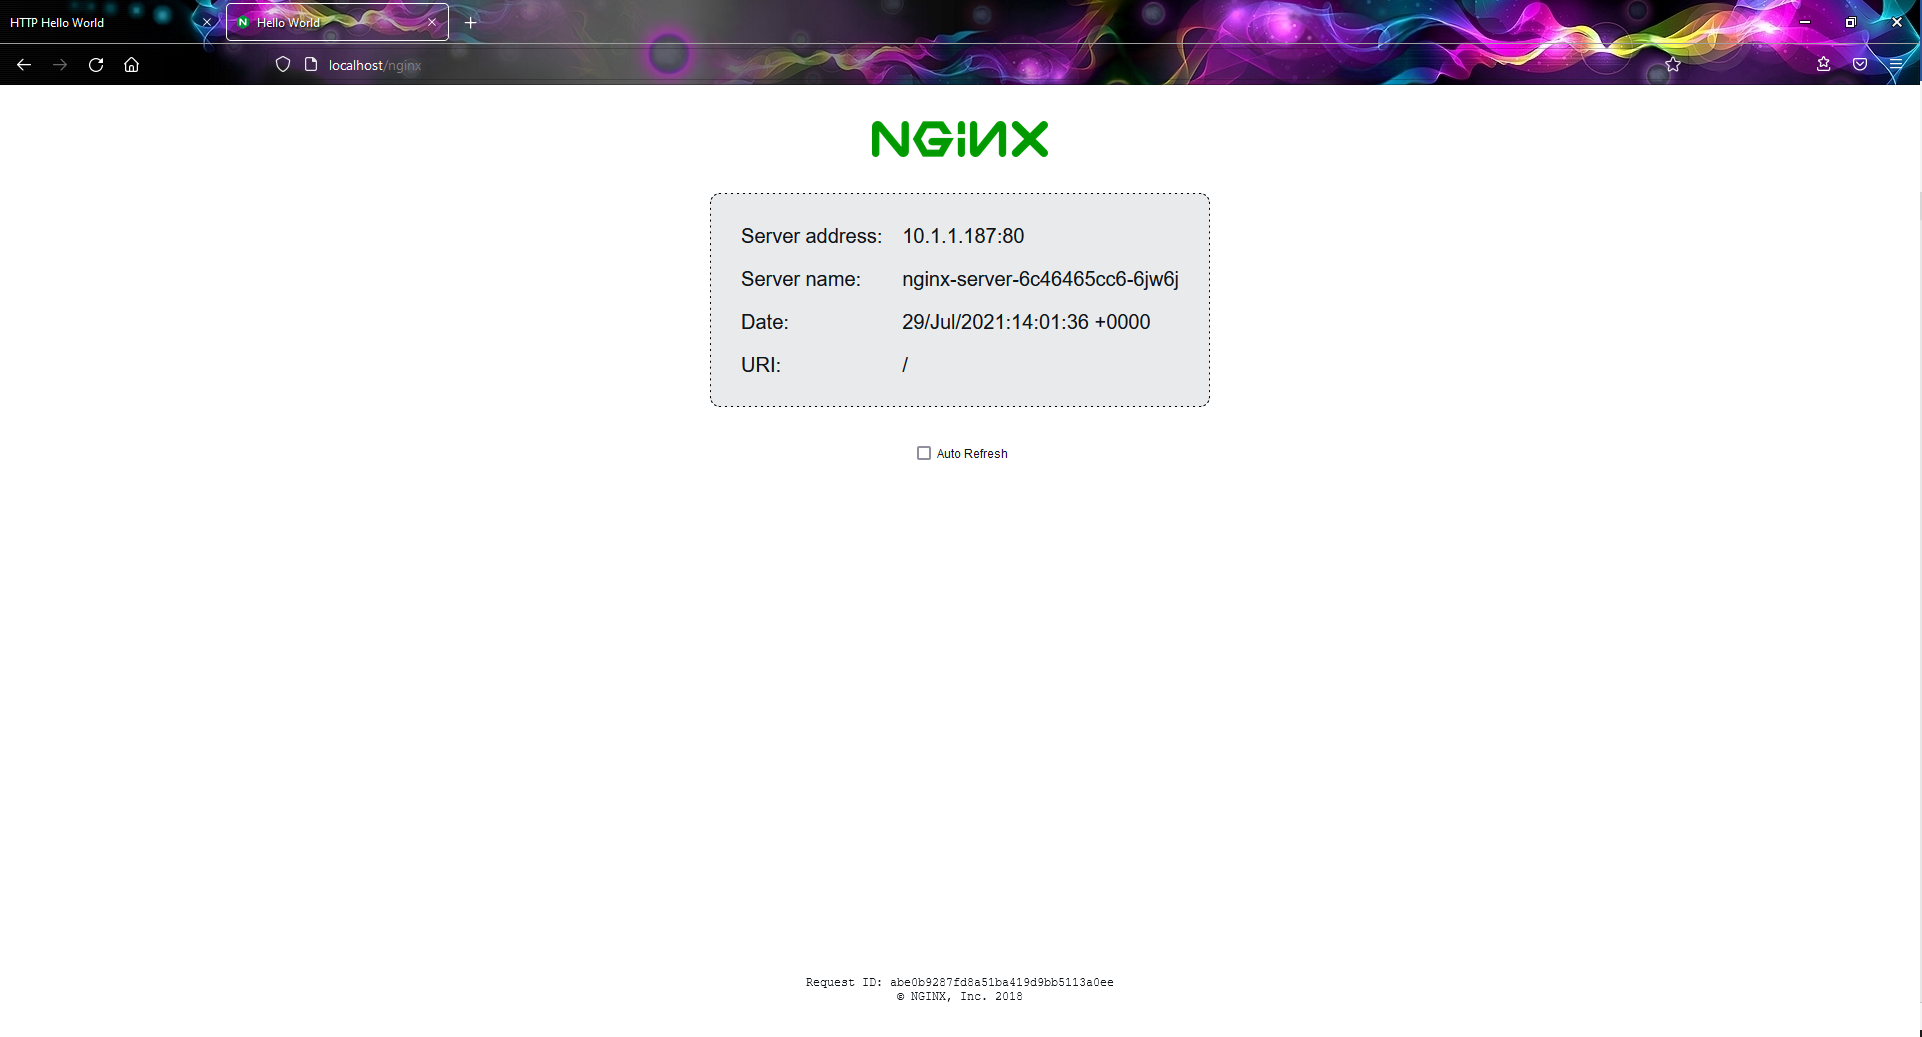 Nginx is serving the response for http://localhost/nginx